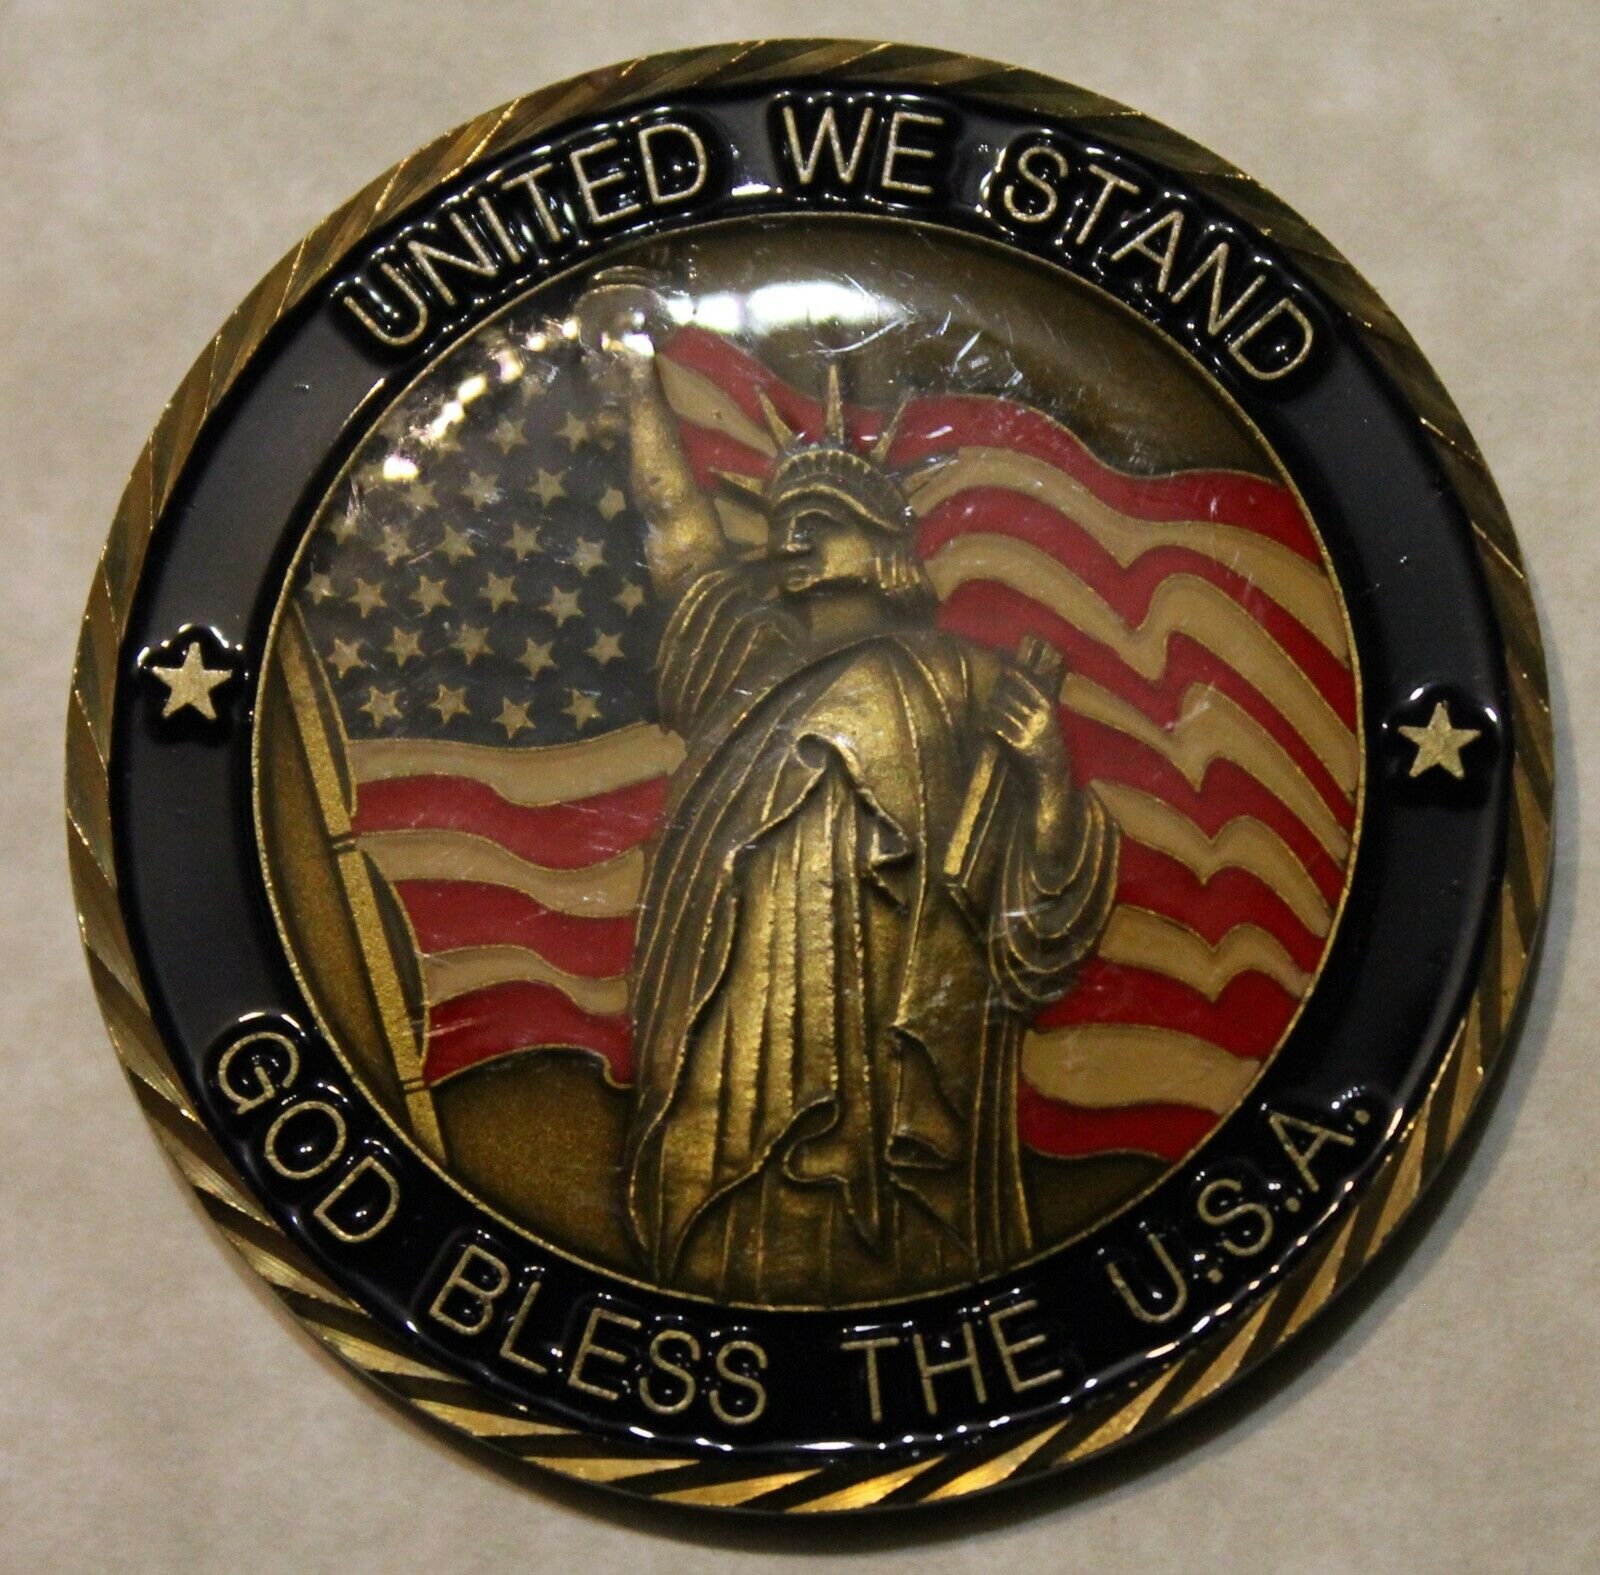 United We Stand September 11, 2001 / 911 Military Challenge Coin